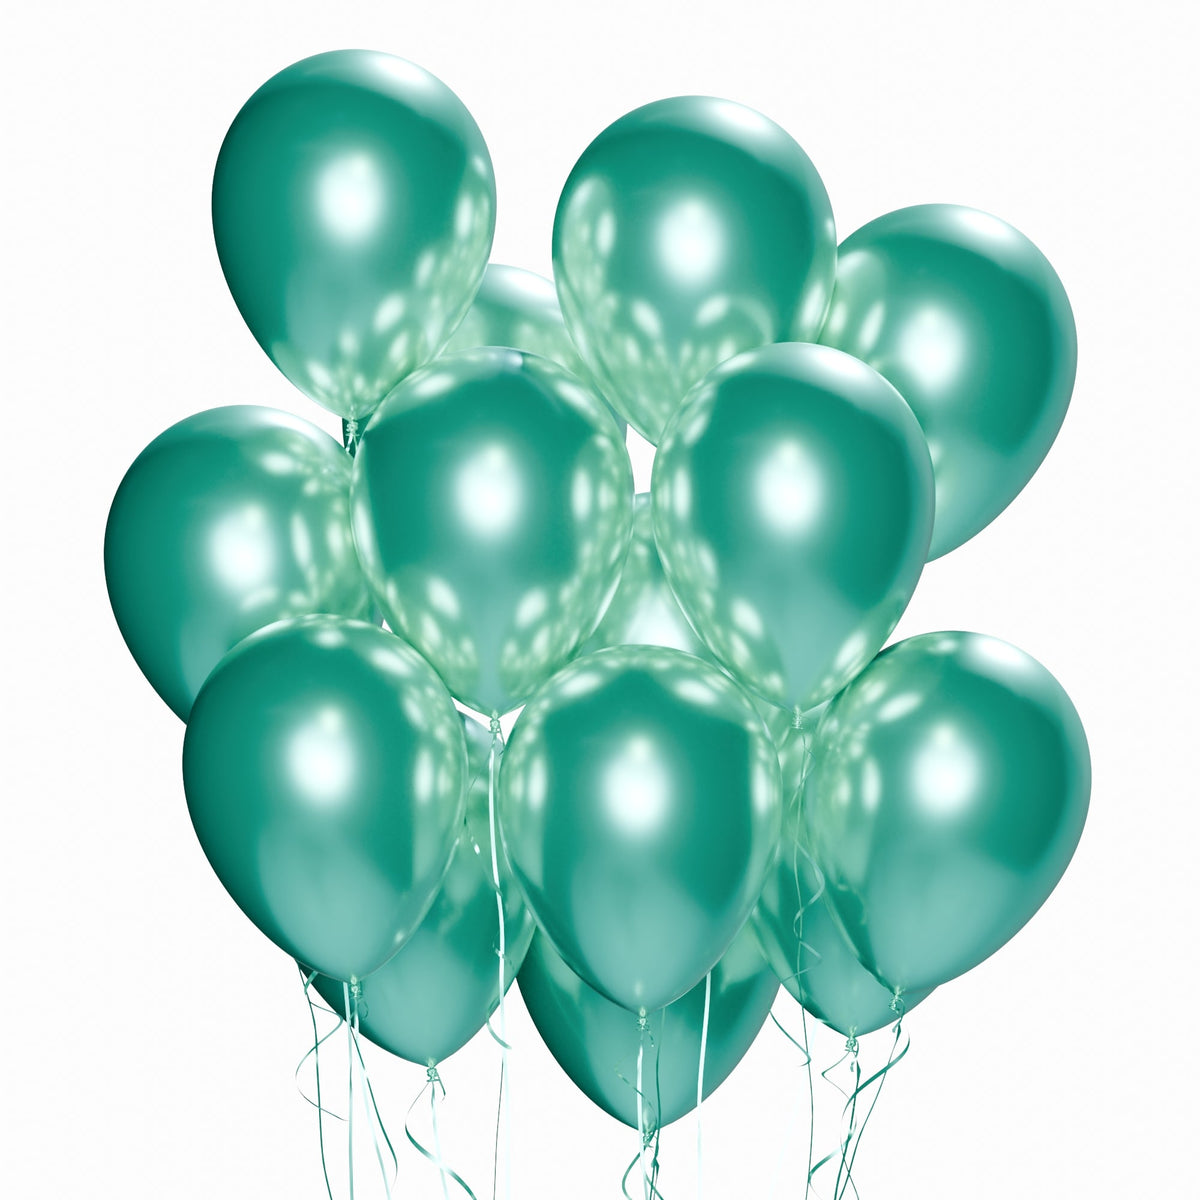 WIDE OCEAN INTERNATIONAL TRADE BEIJING CO., LTD Balloons Green Latex Balloon 12 Inches, Chrome Collection, 15 Count 810064198656